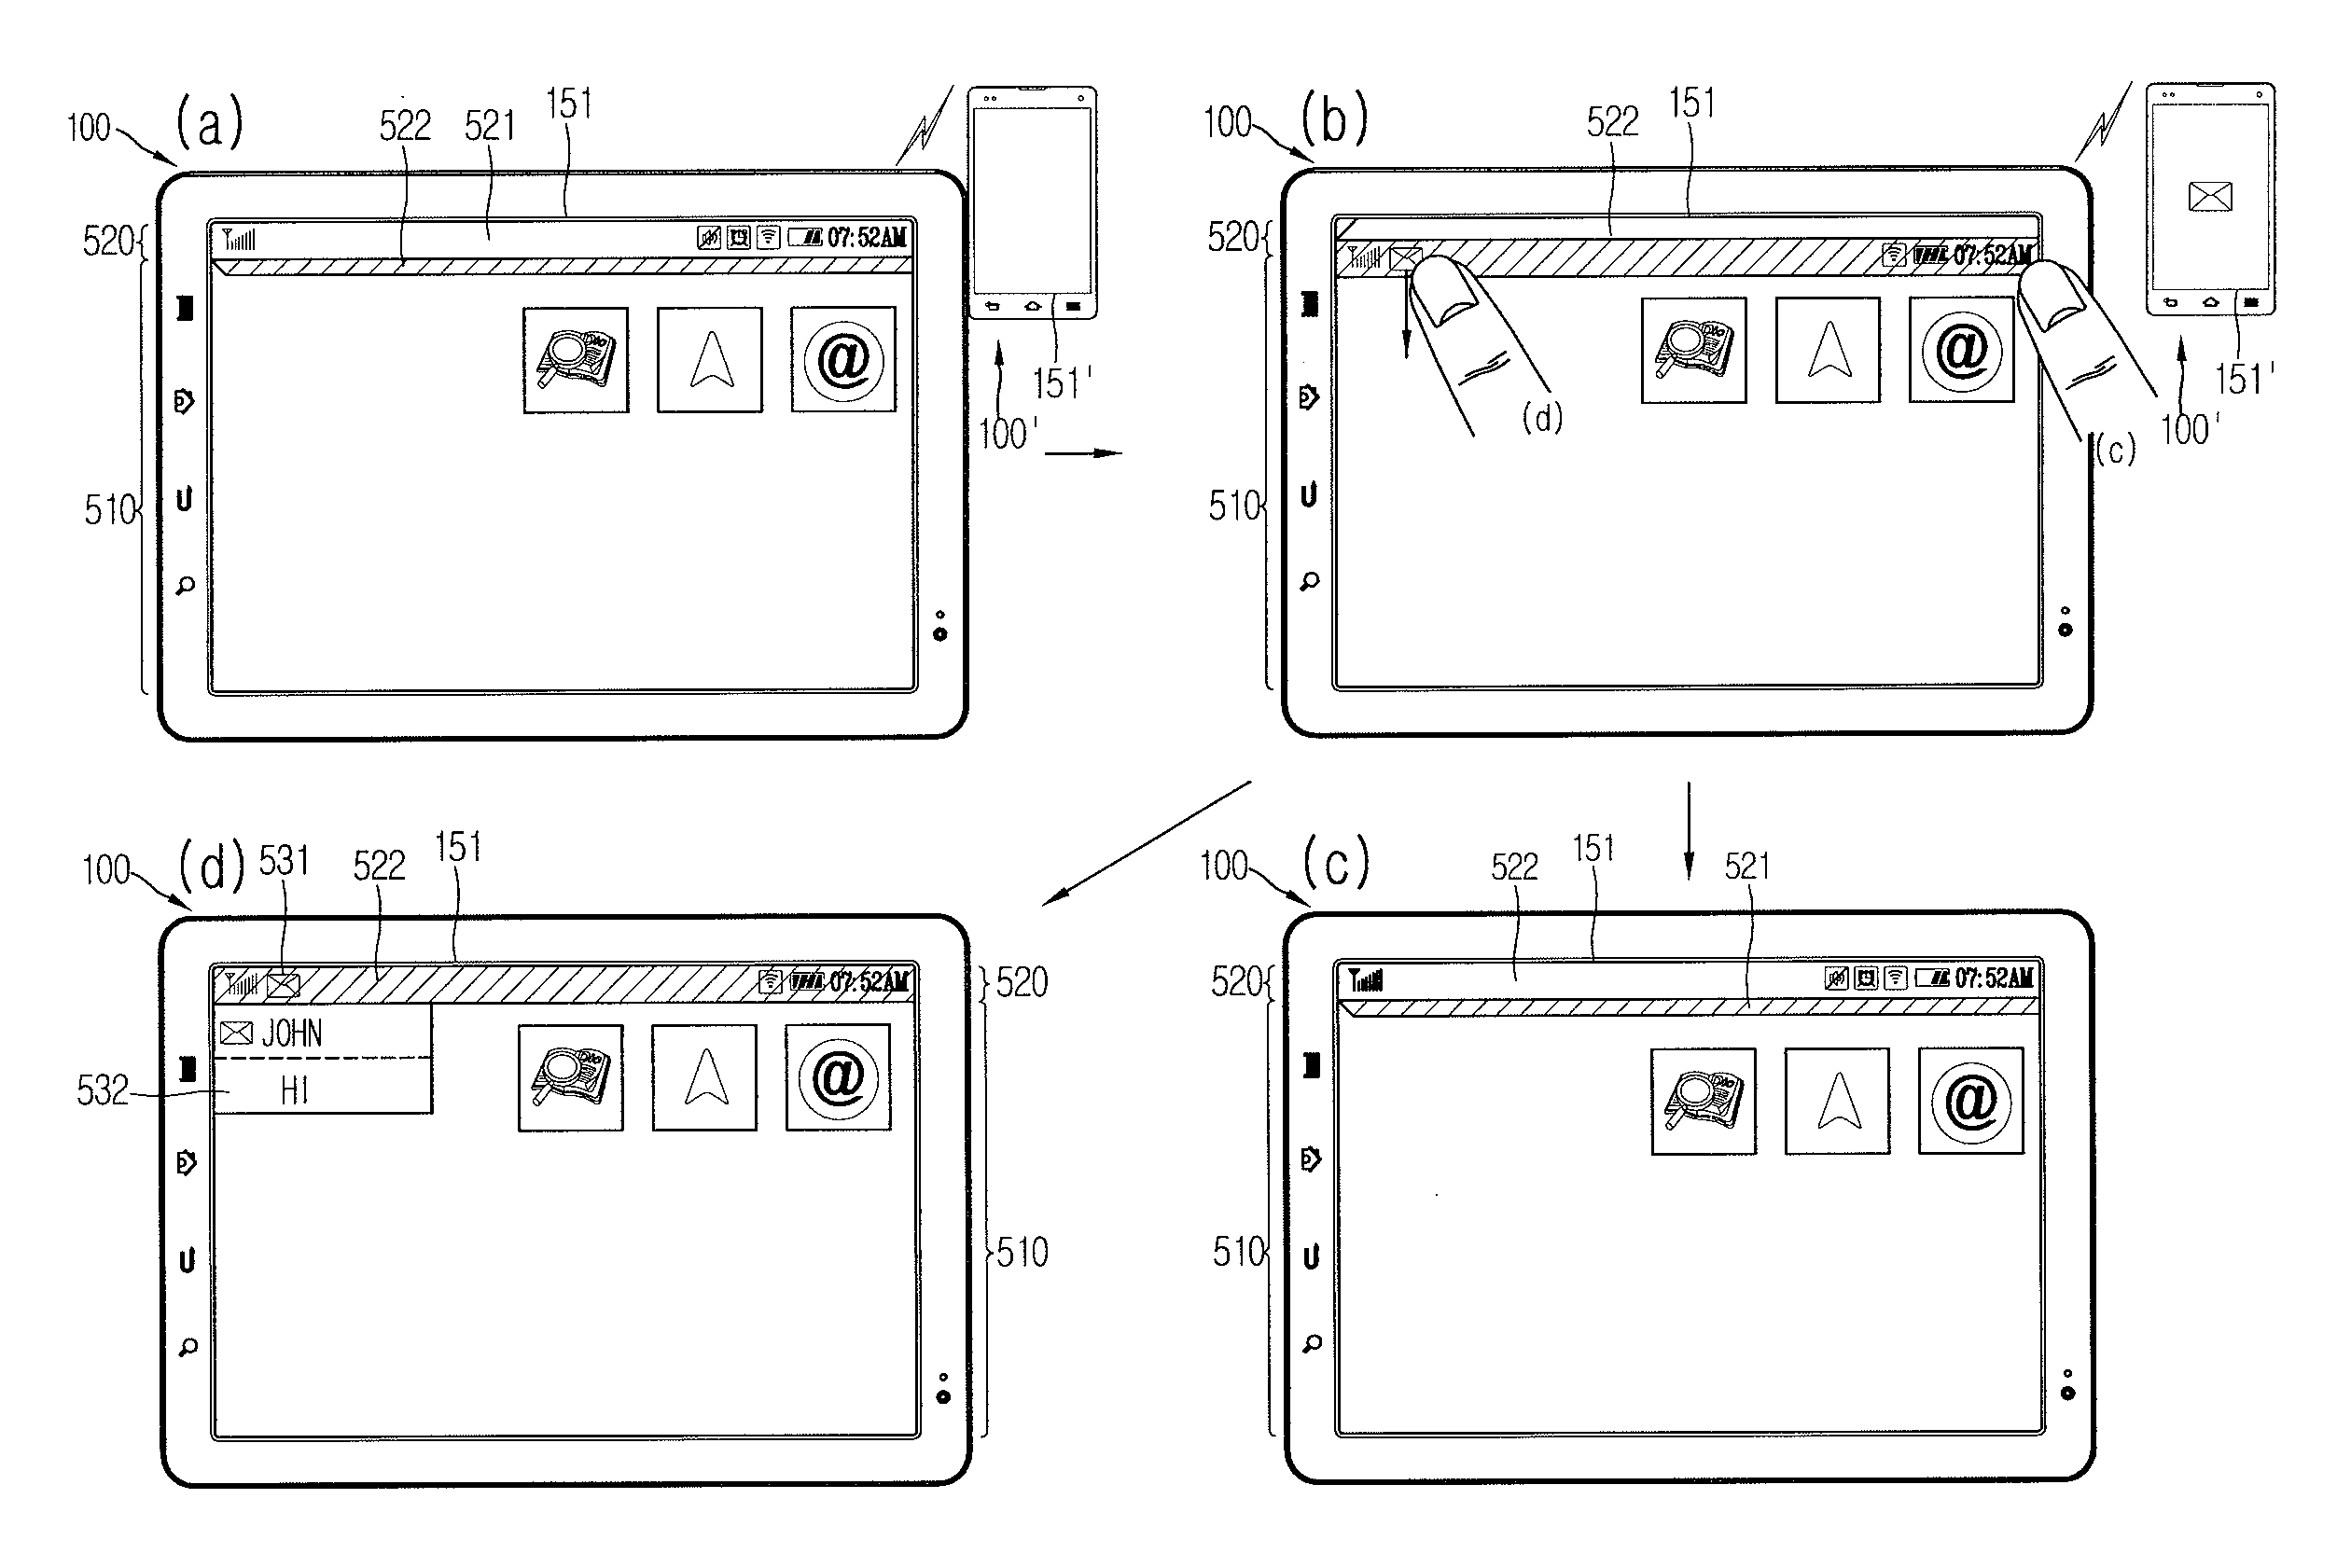 Mobile terminal and method of controlling an external mobile terminal